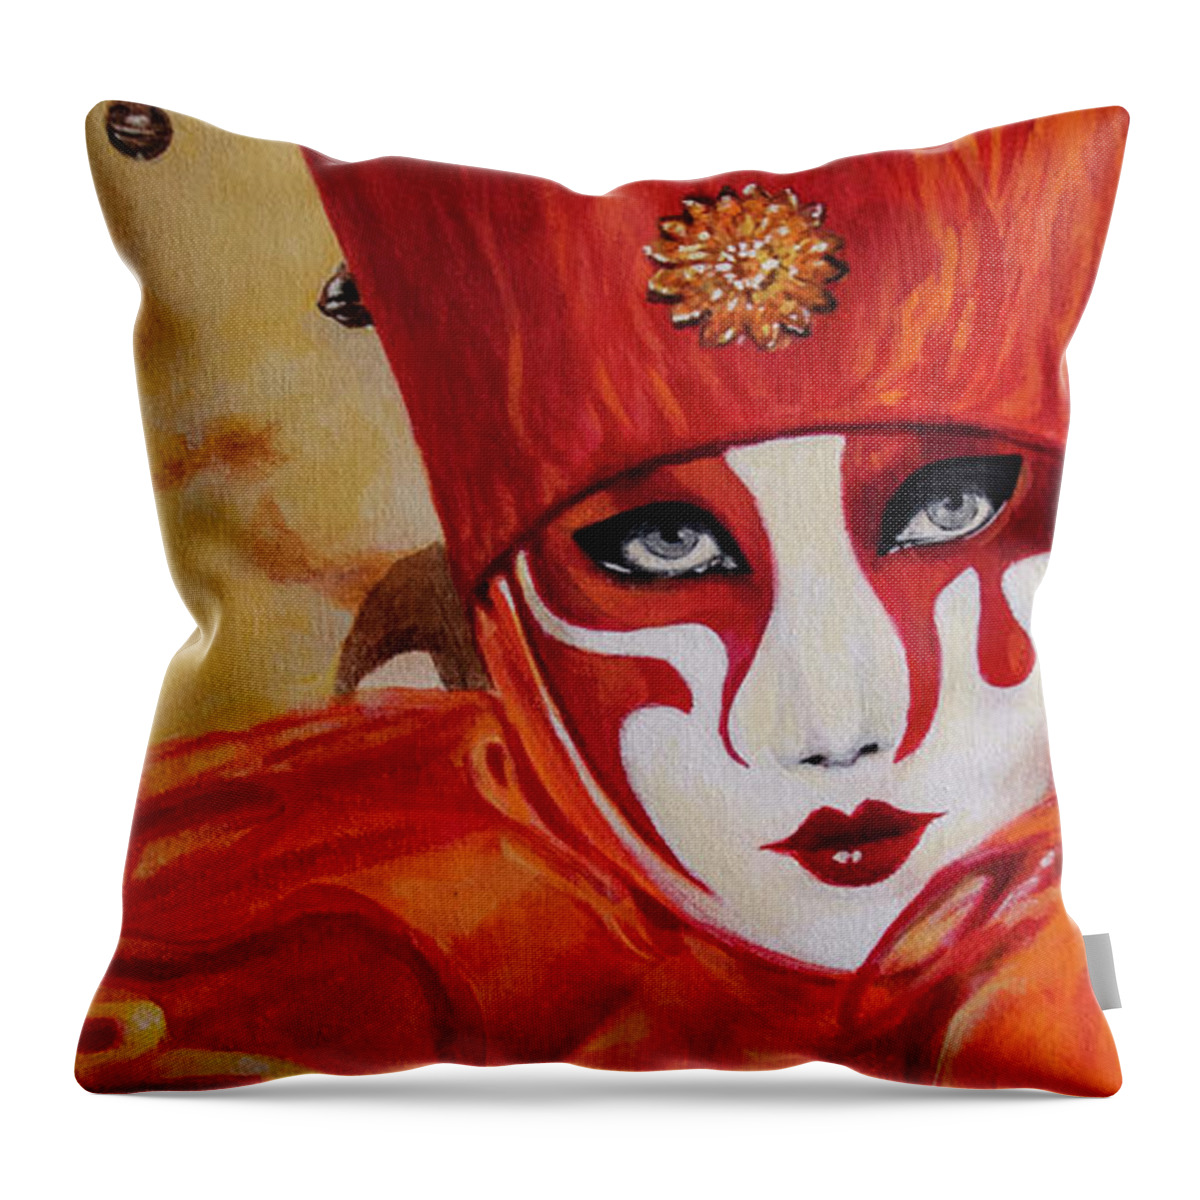  Venetian Mask Throw Pillow featuring the painting Trouble by Elaine Berger